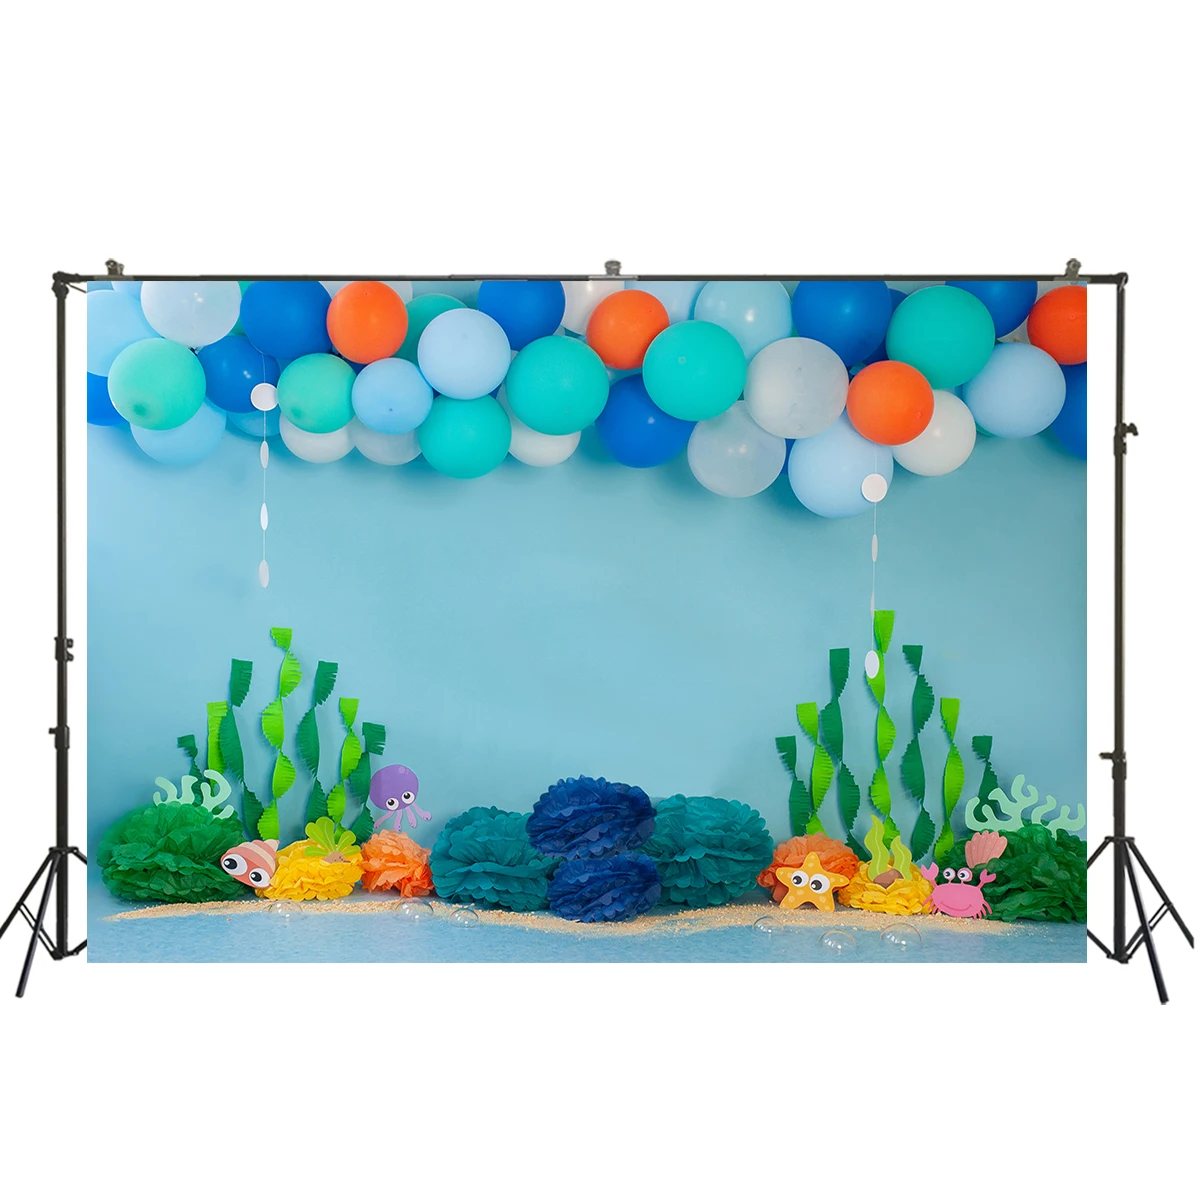 6x6FT Vinyl Photo Backdrops,Octopus,Cartoon Octopus in Sea Background for Selfie Birthday Party Pictures Photo Booth Shoot